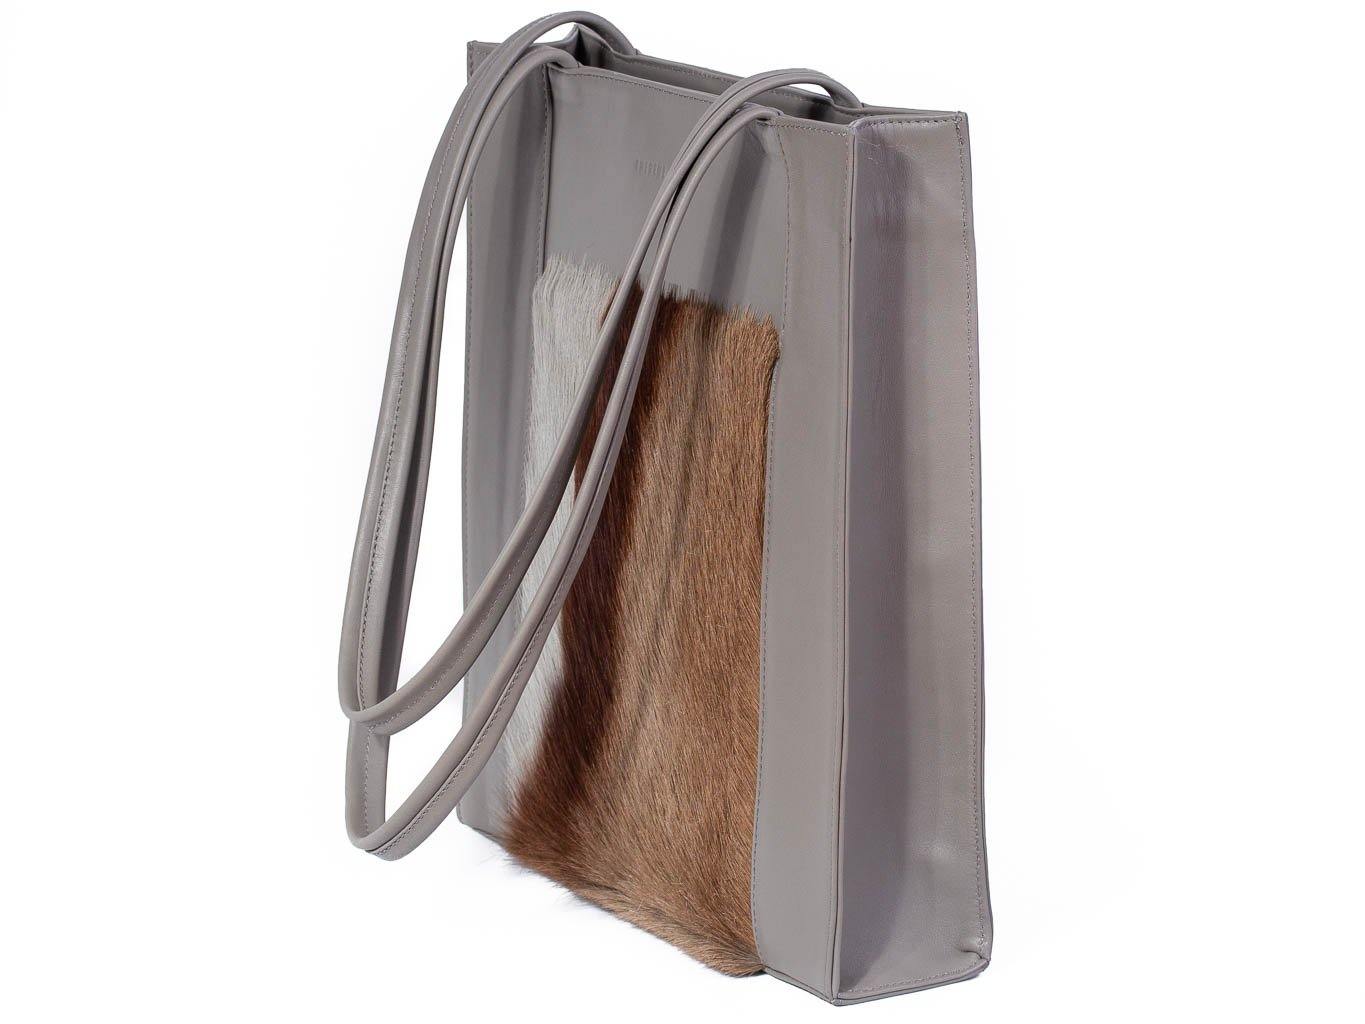 Tote Springbok Handbag in Slate Grey with a stripe feature by Sherene Melinda side angle strap